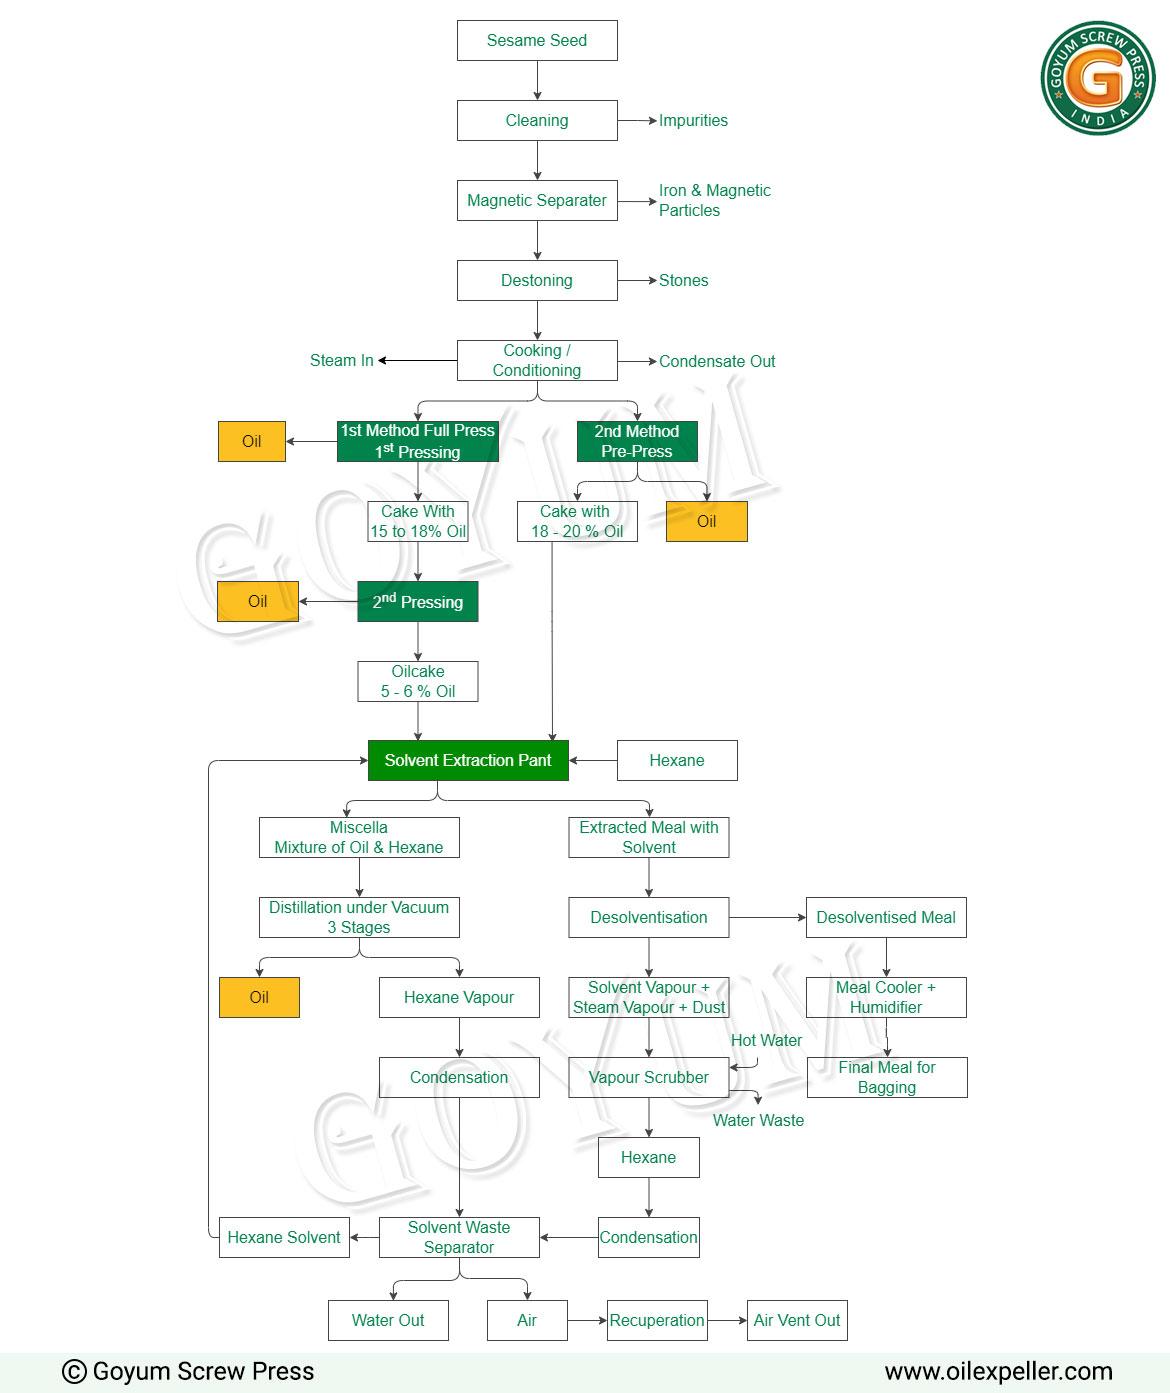 Sesame Seed solvent extraction plant process flowchart